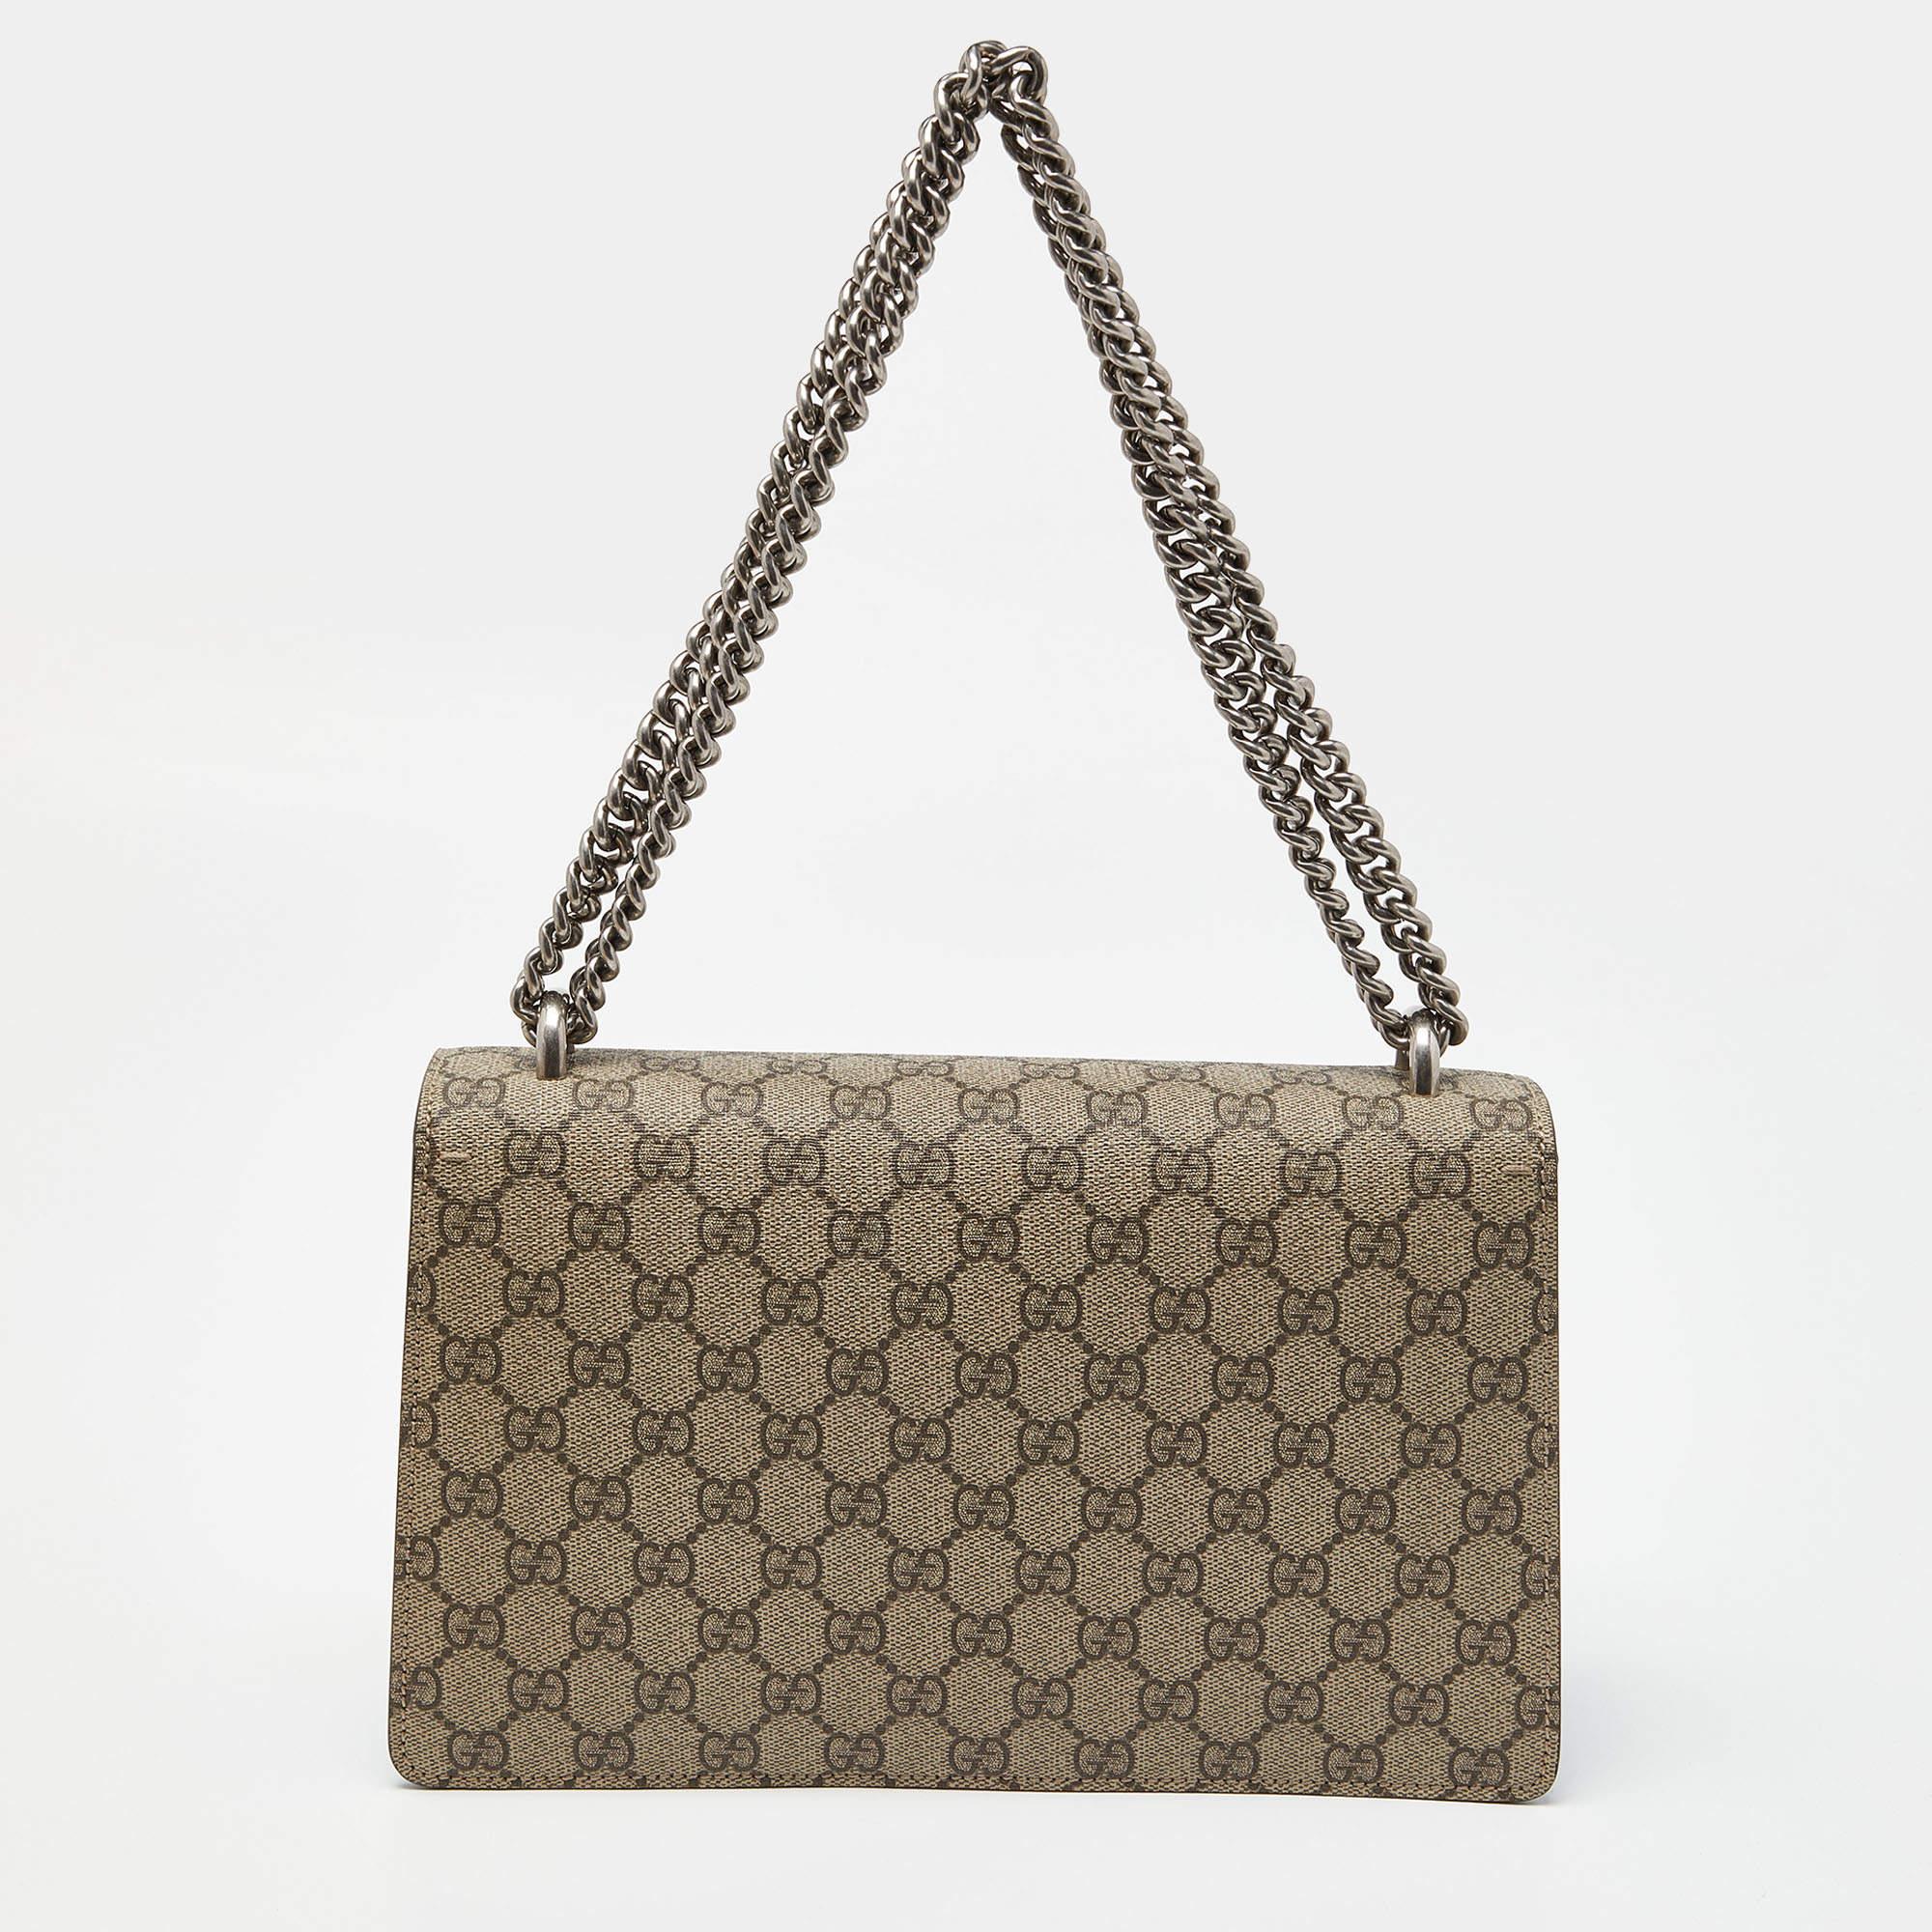 Gucci Beige/Blue GG Supreme Canvas and Suede Small Dionysus Shoulder Bag For Sale 1